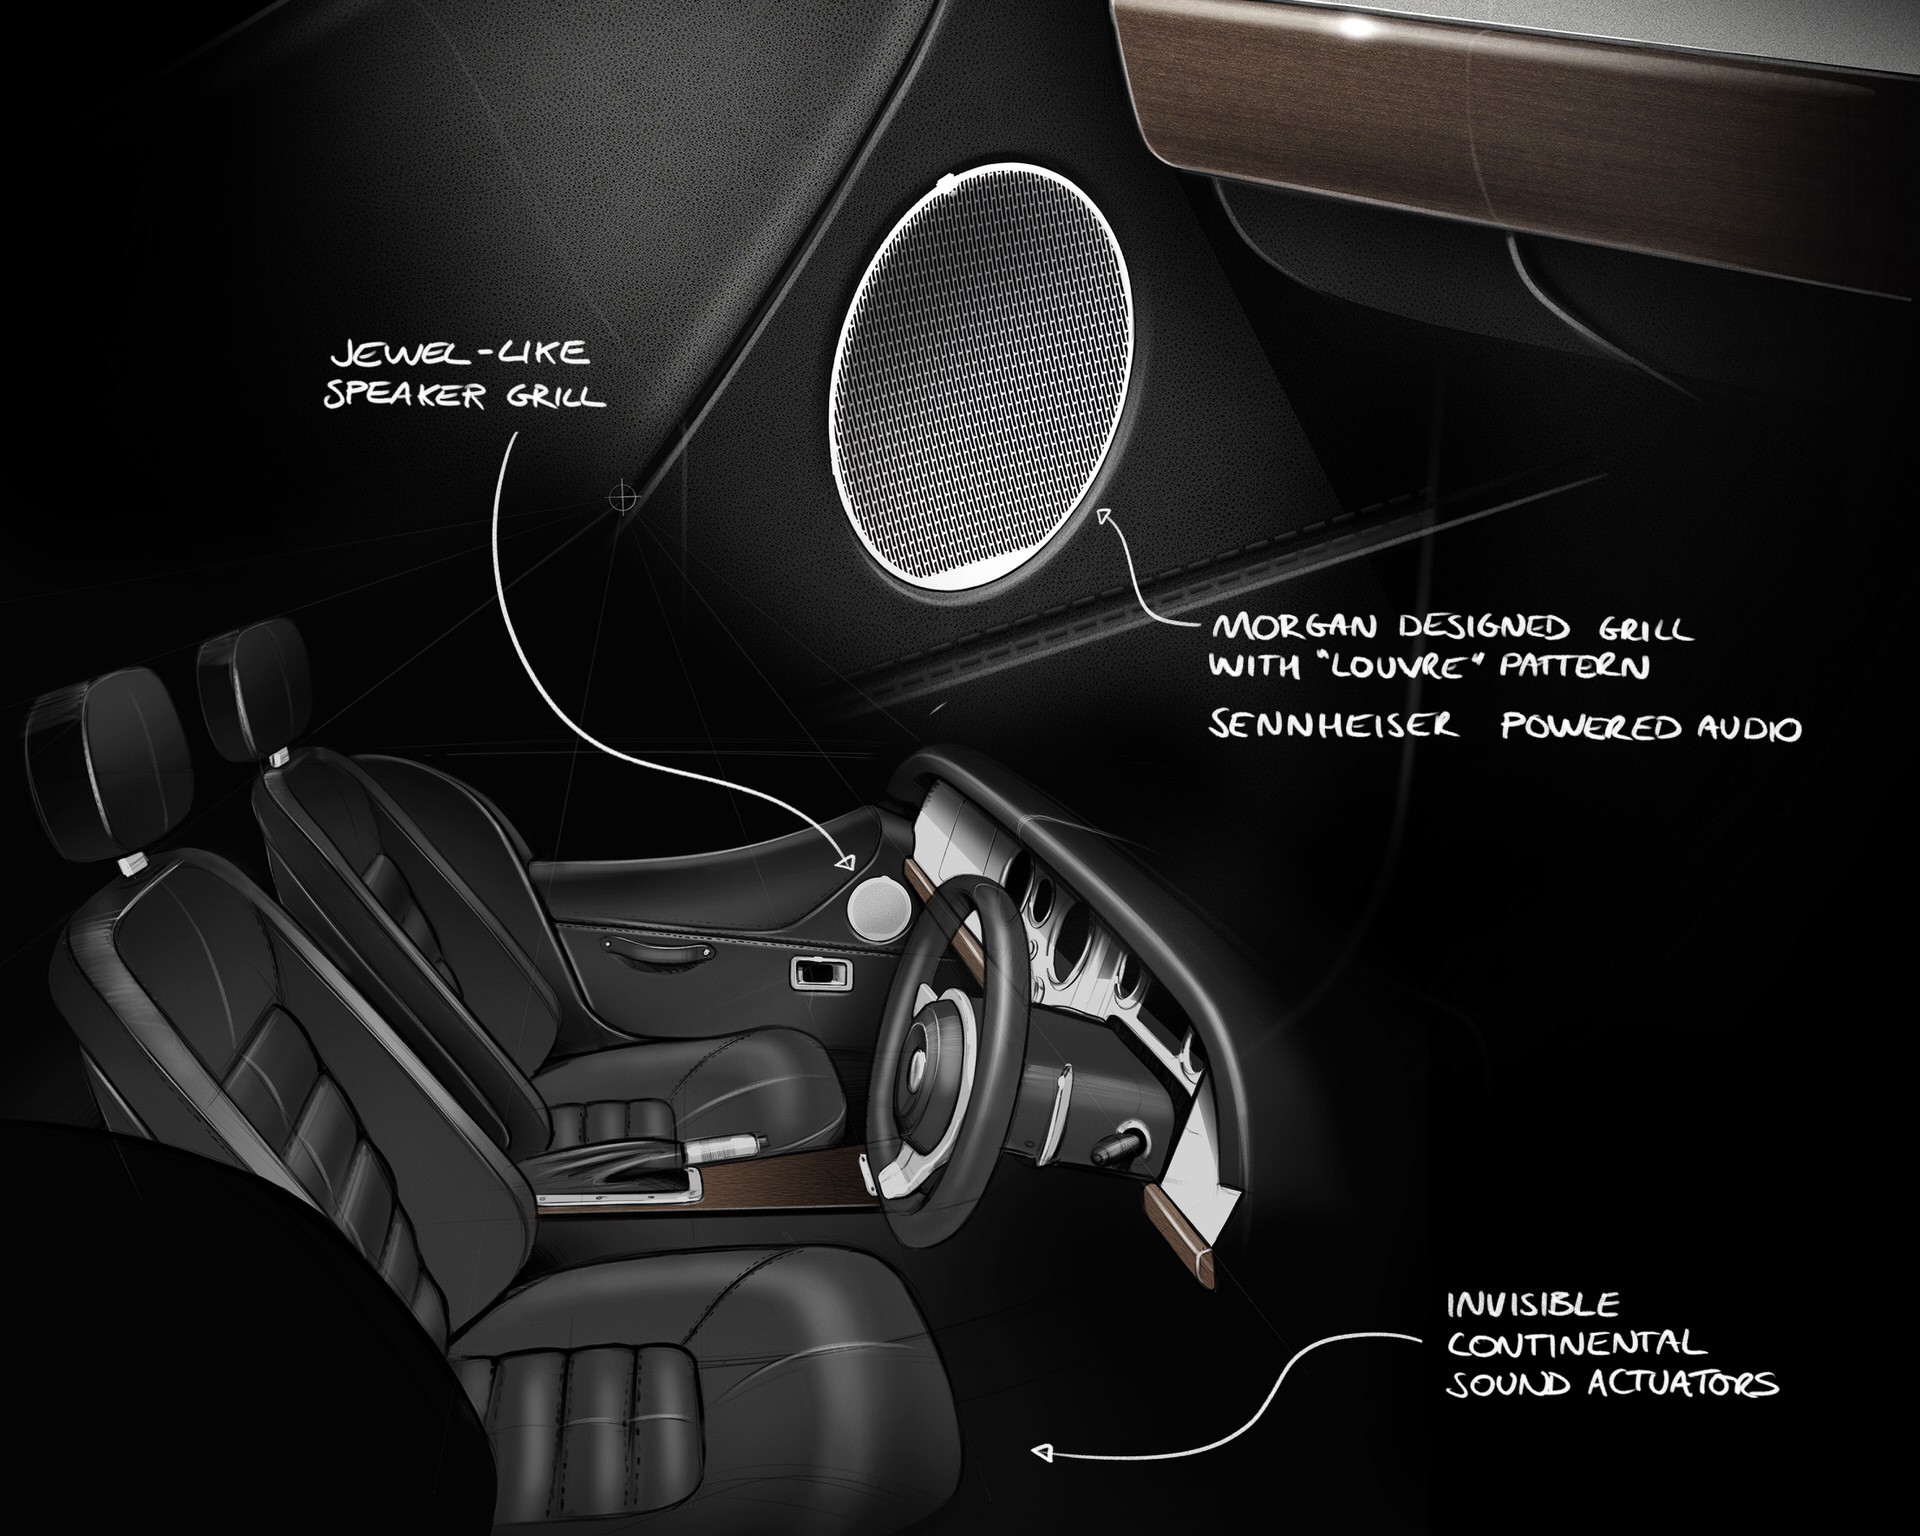 An explanatory diagram of the Sennheiser sound system coming to Morgan cars